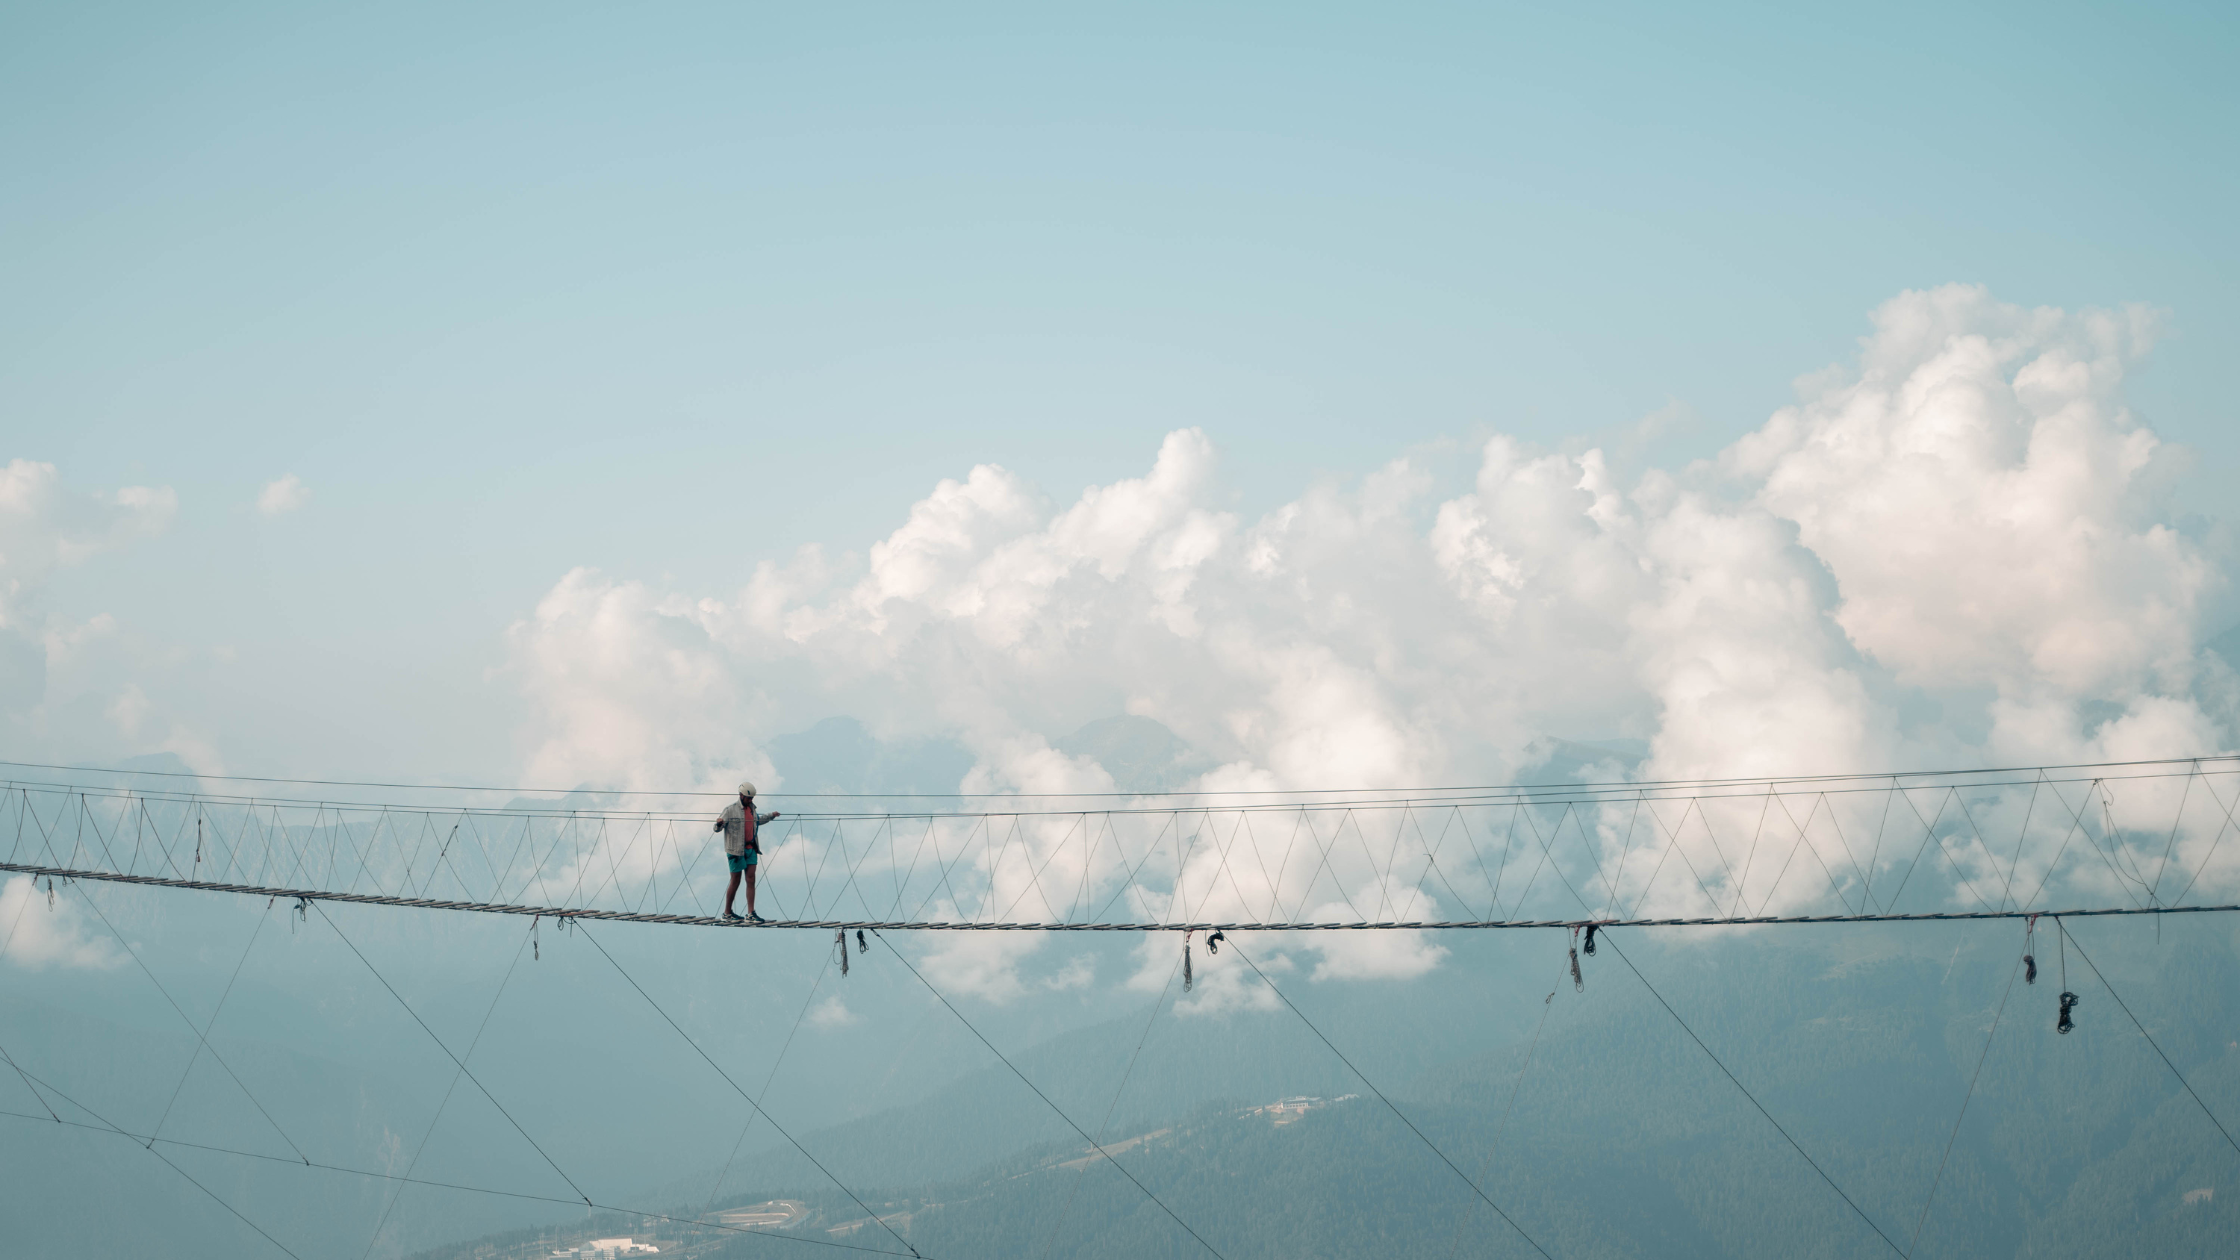 Person walking across a thin wire bridge, high up in the mountains